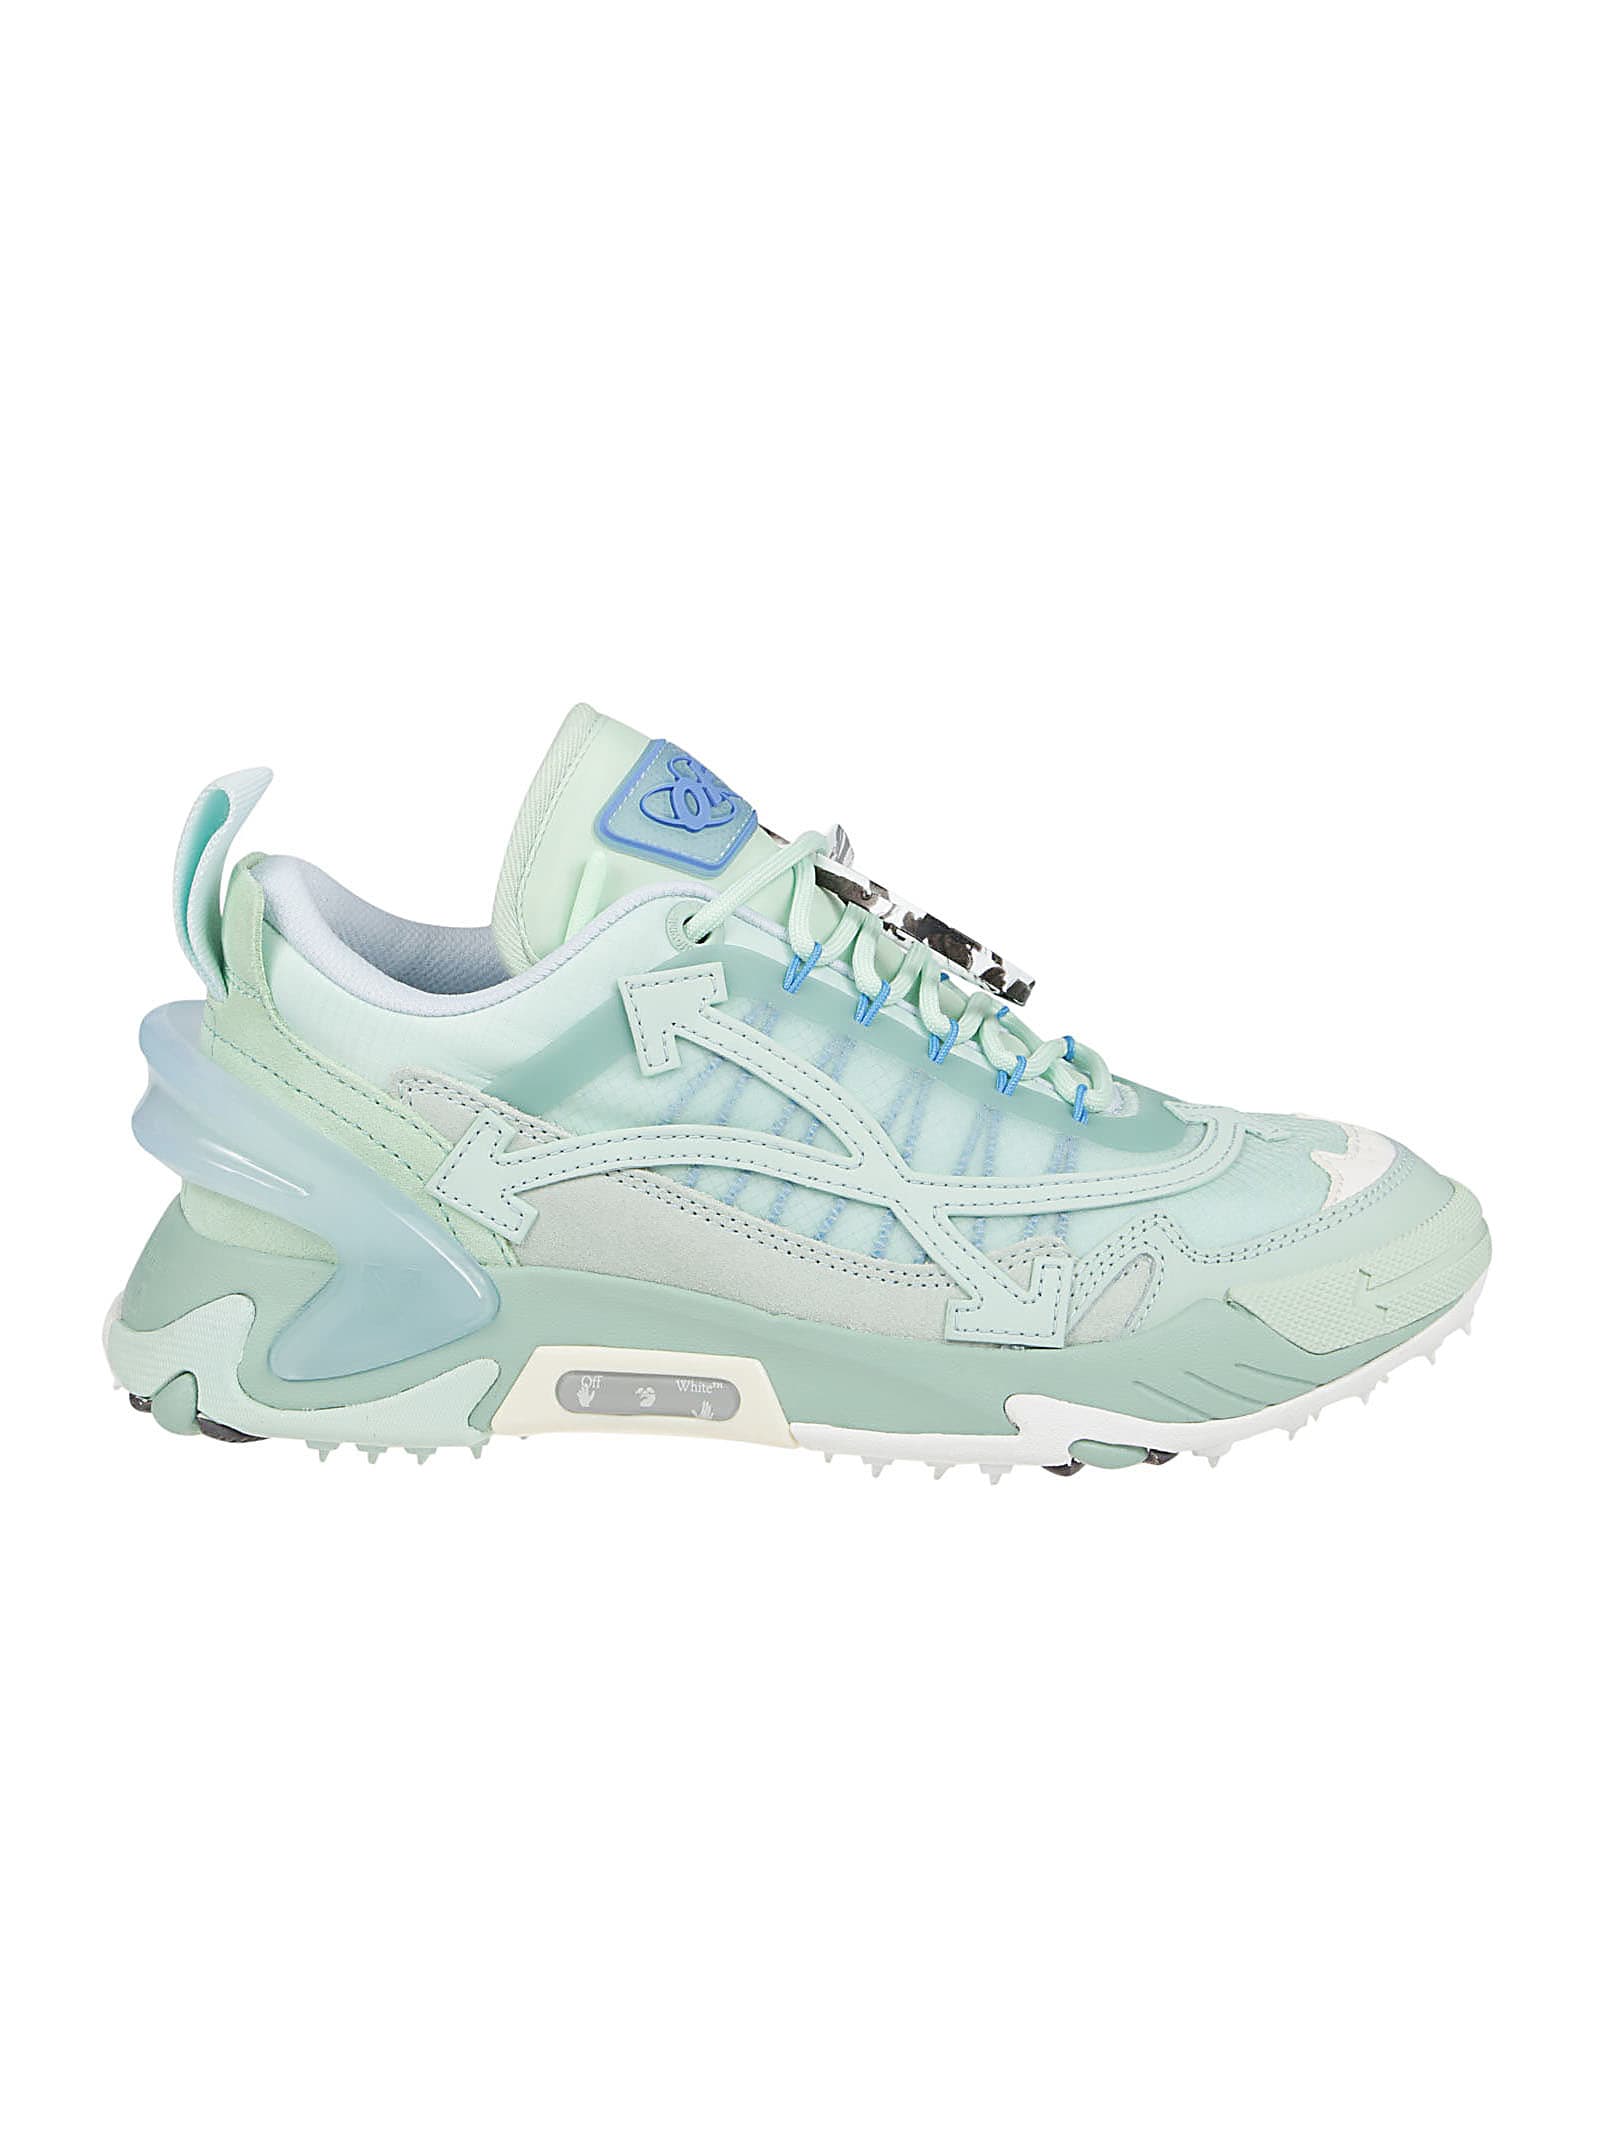 OFF-WHITE SNEAKERS ODSY 2000,OMIA190S21FAB001 5140 MINT LIGHT BLUE